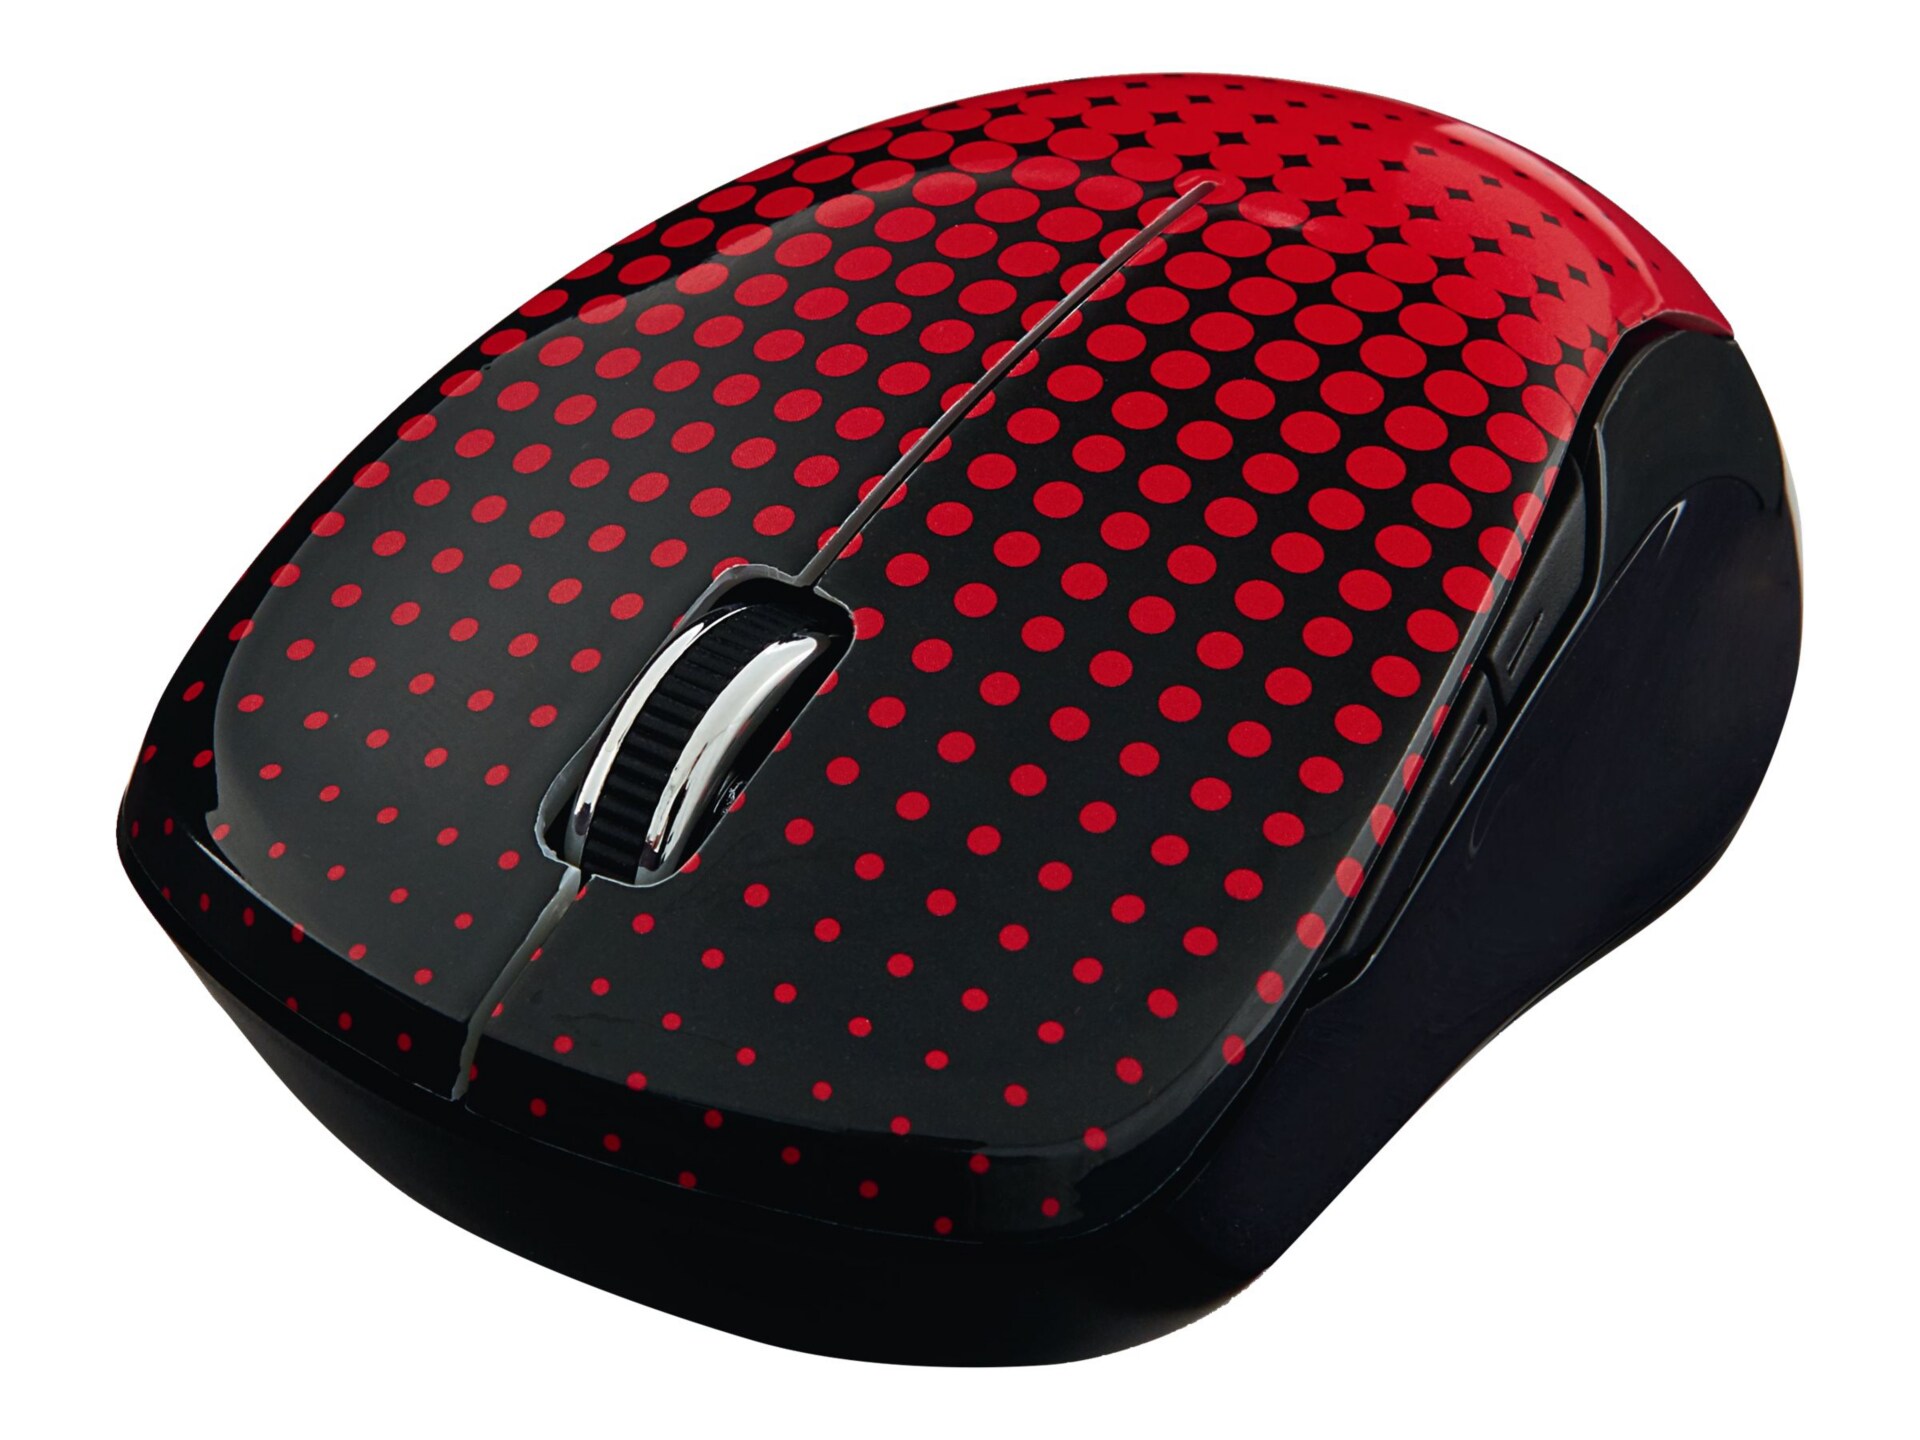 Verbatim Wireless Notebook Multi-Trac Blue LED Mouse - mouse - 2.4 GHz - red, dot pattern